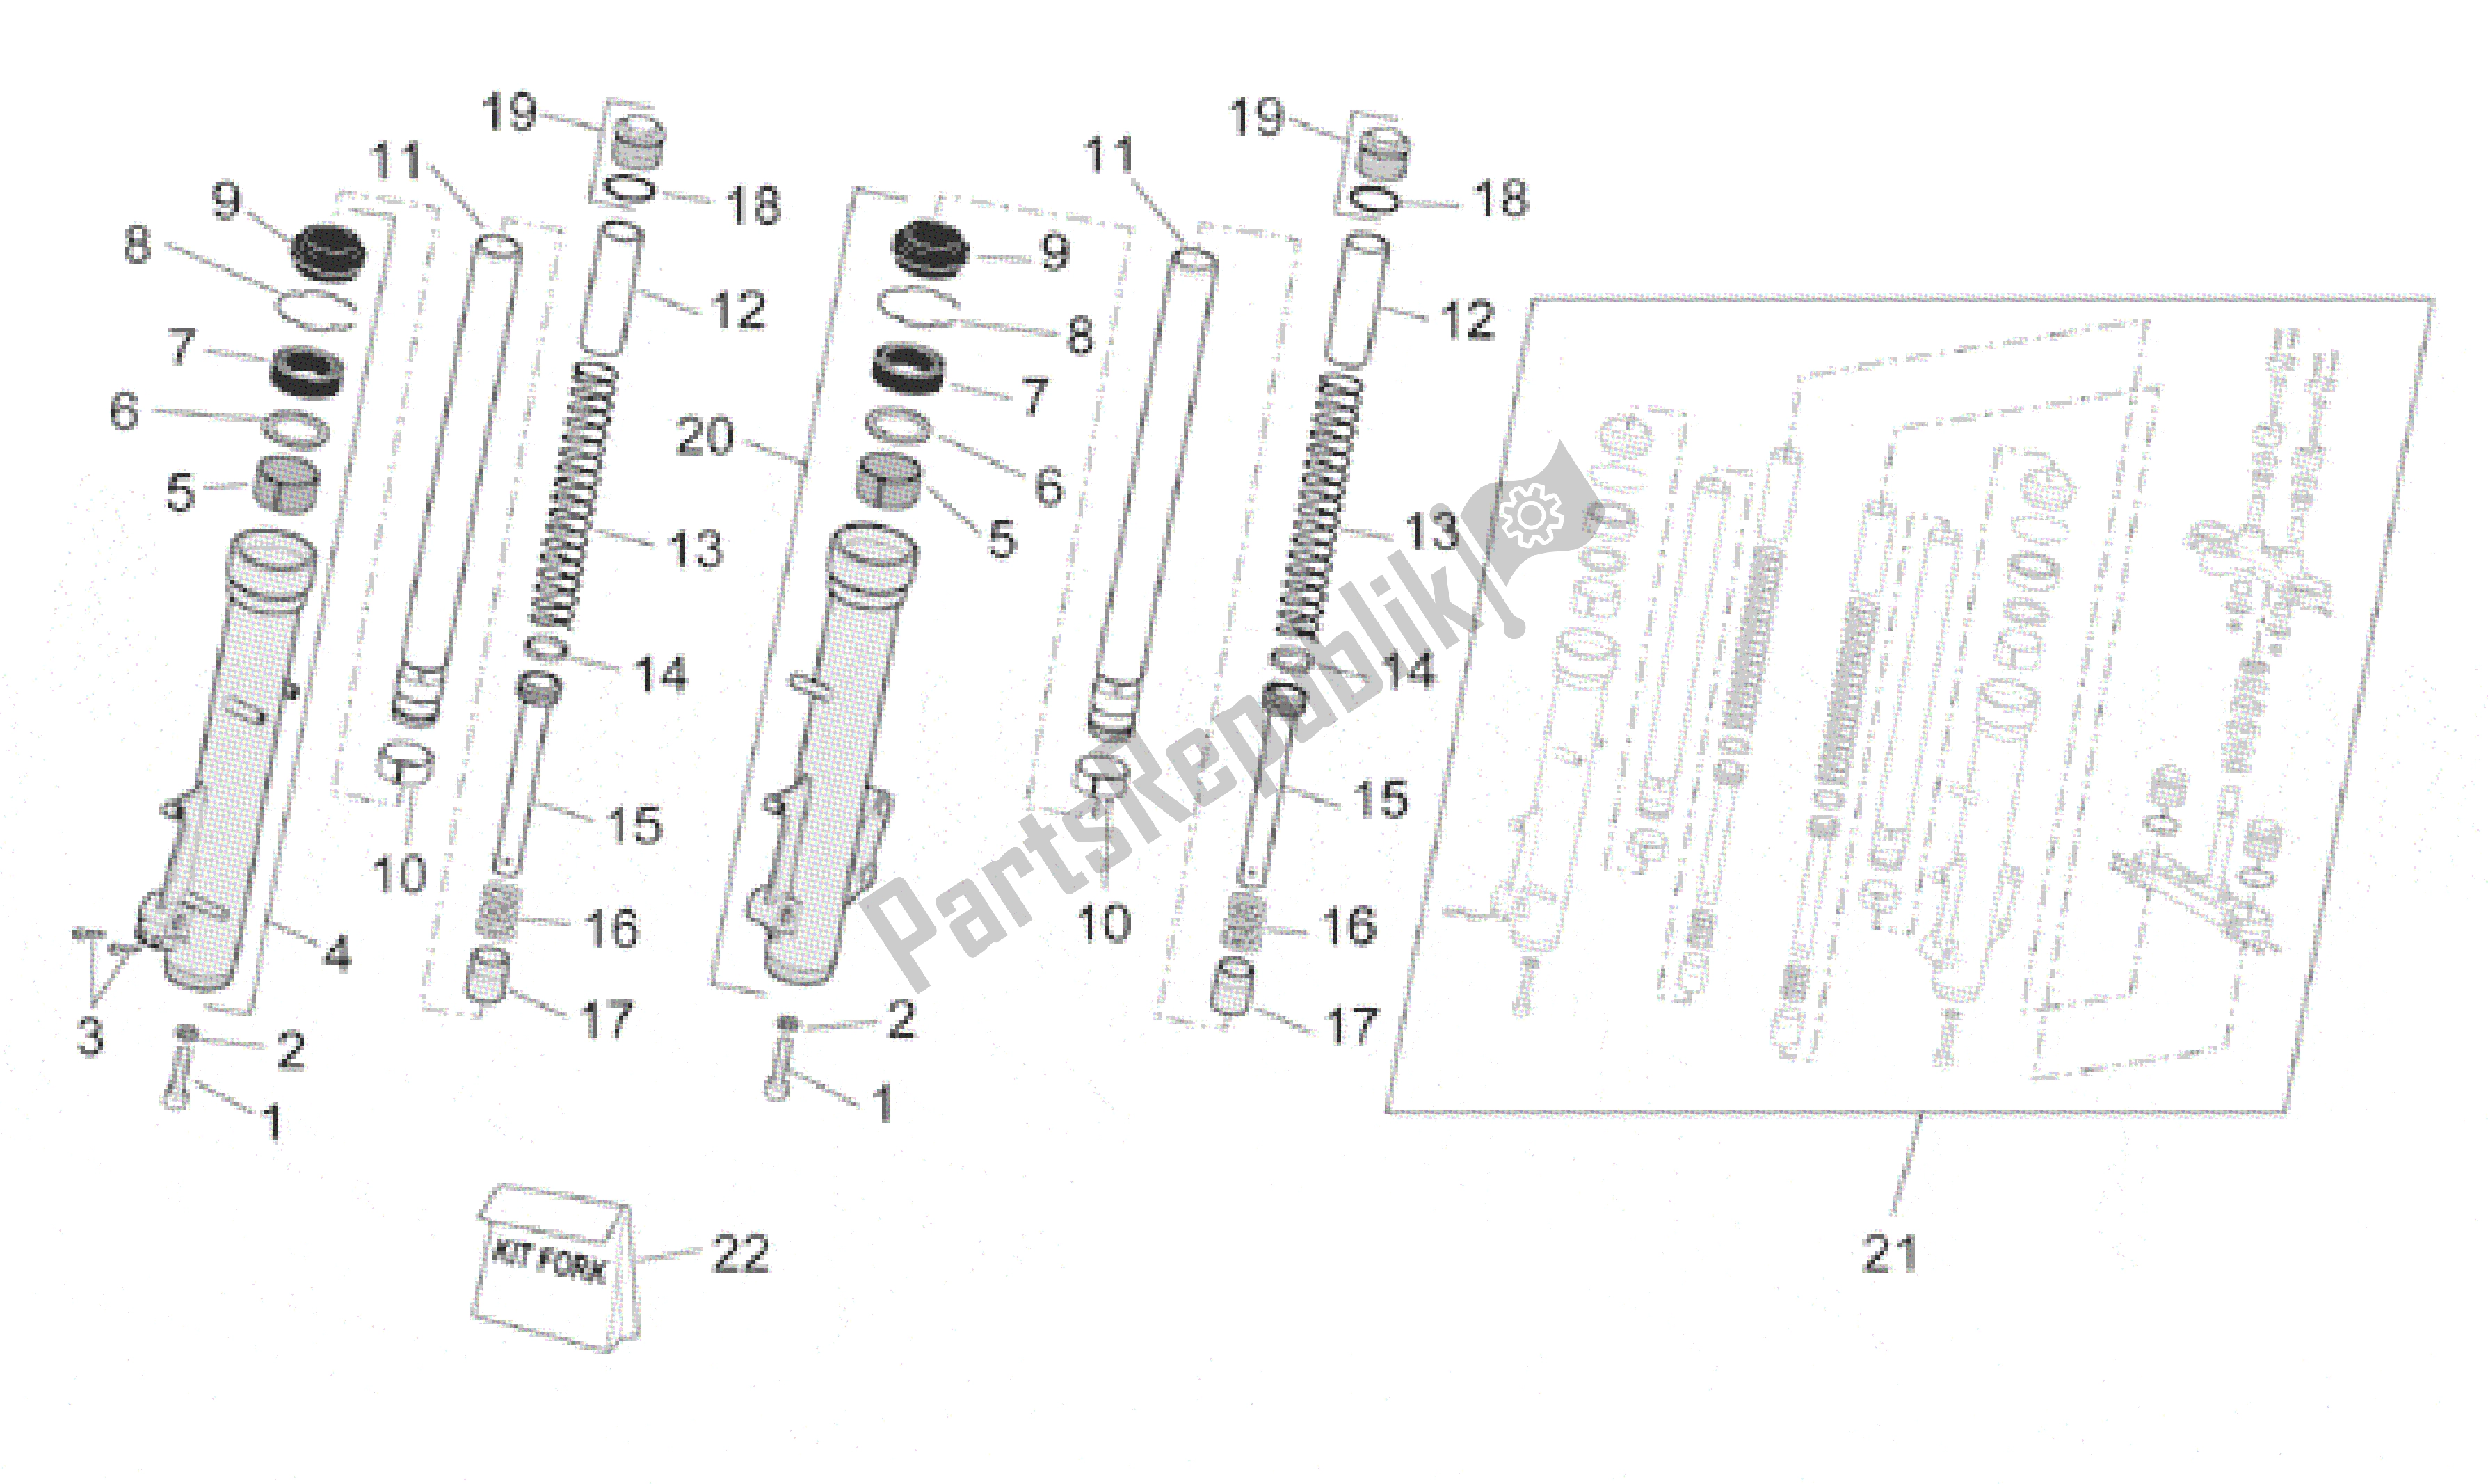 All parts for the Front Fork of the Aprilia Pegaso 650 1997 - 2000